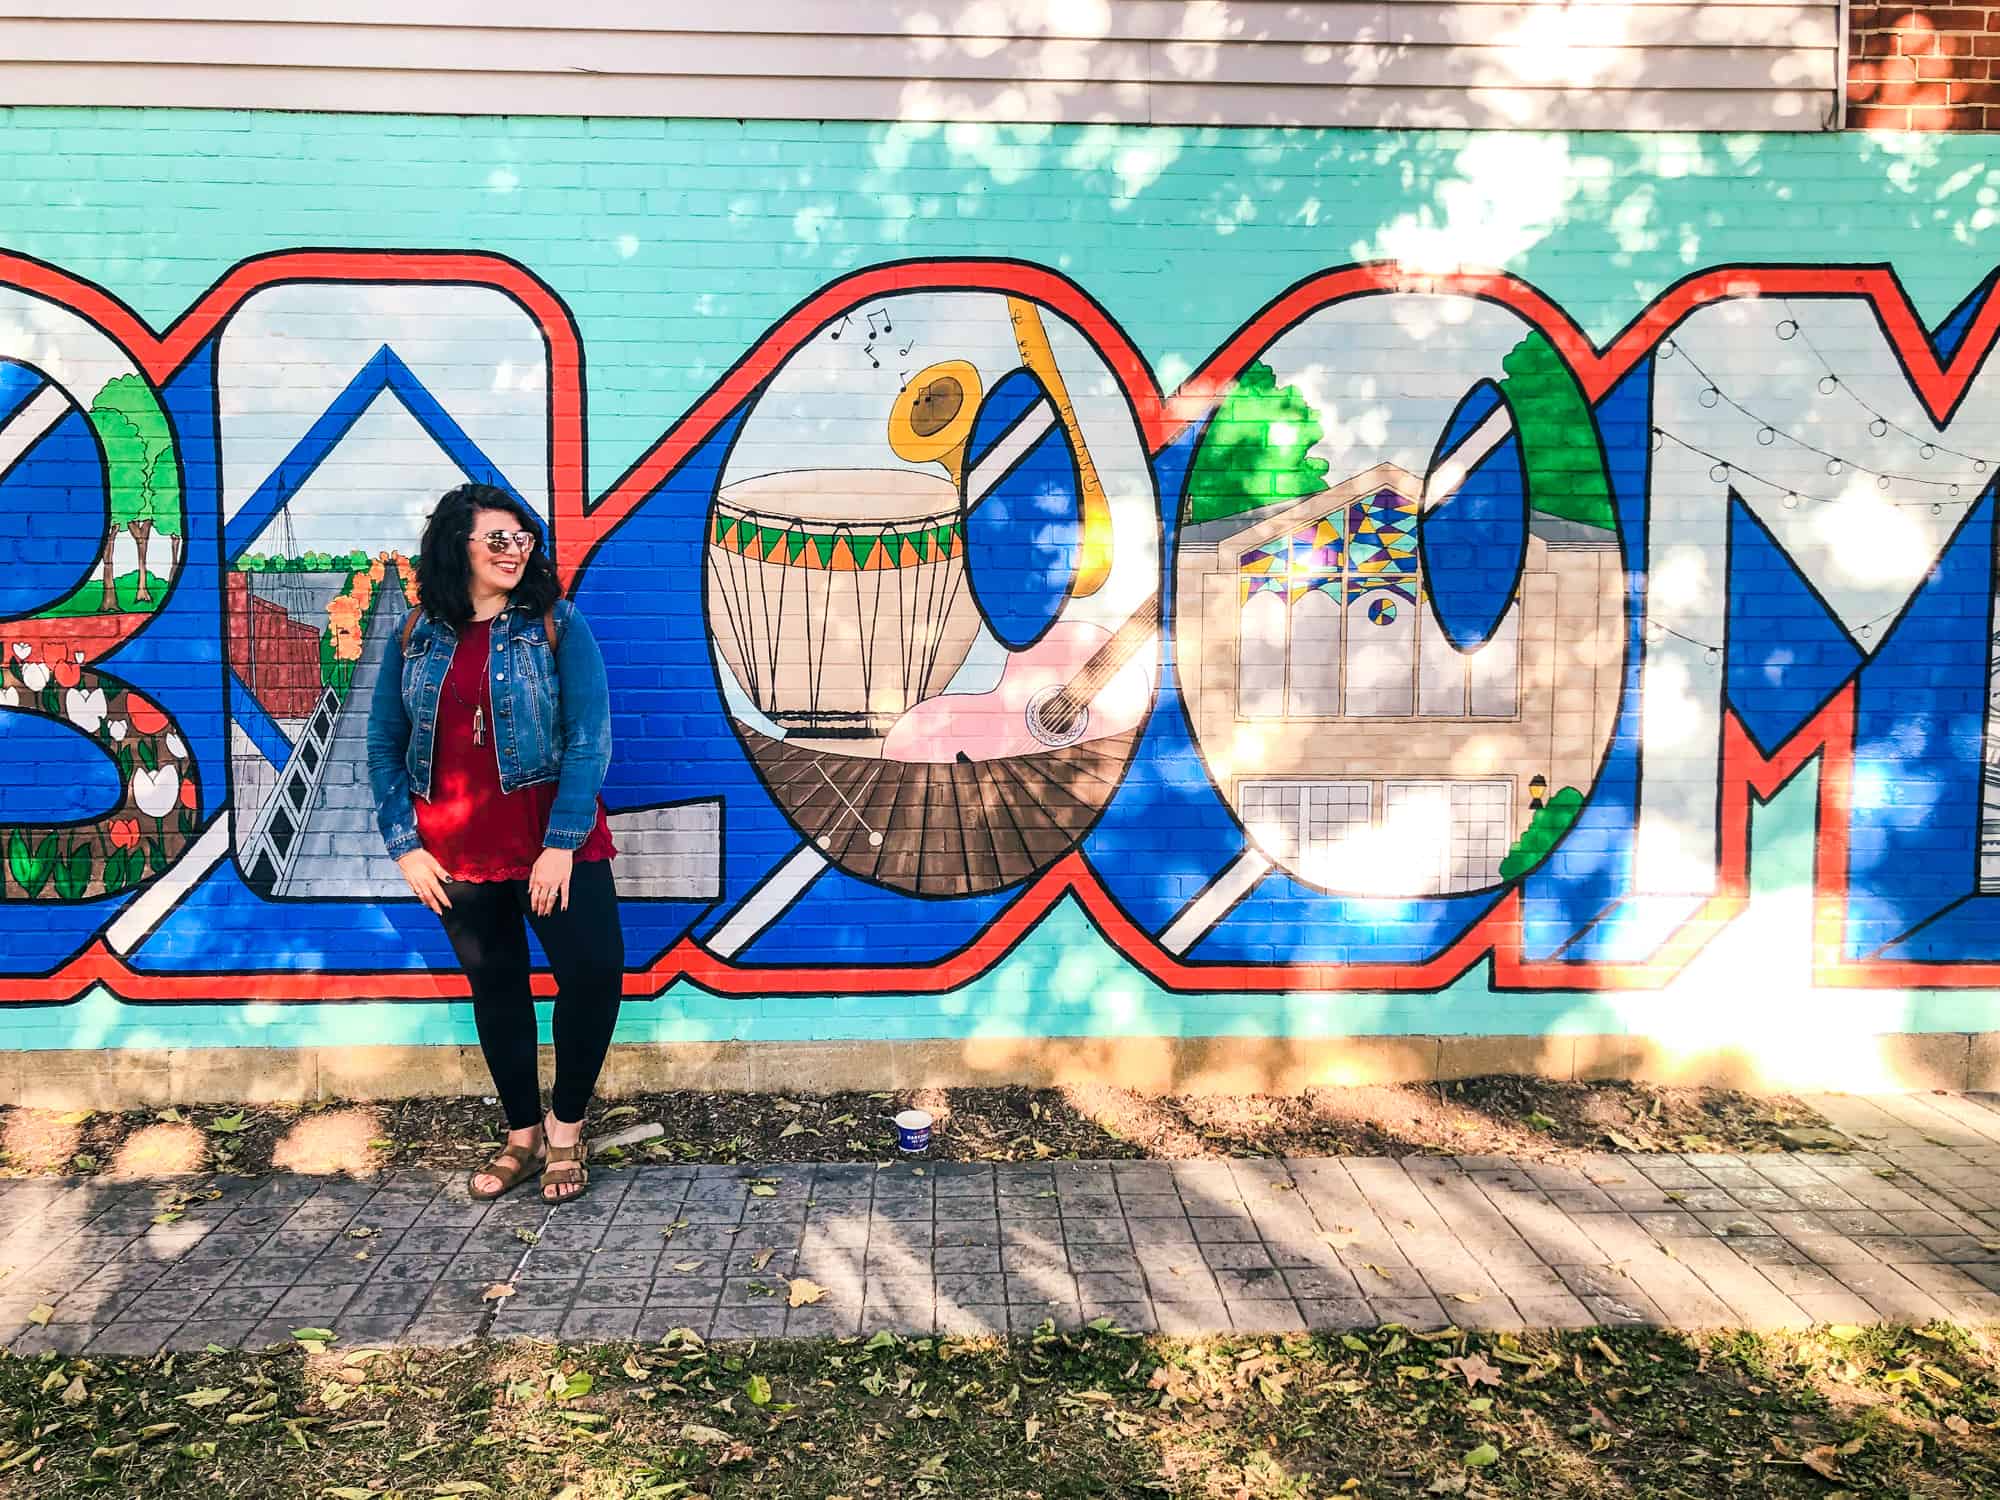 Brunette woman in leggings and a denim jacket stands in front of a painted mural that says "Bloomington," though only the "Bloom" is visible.